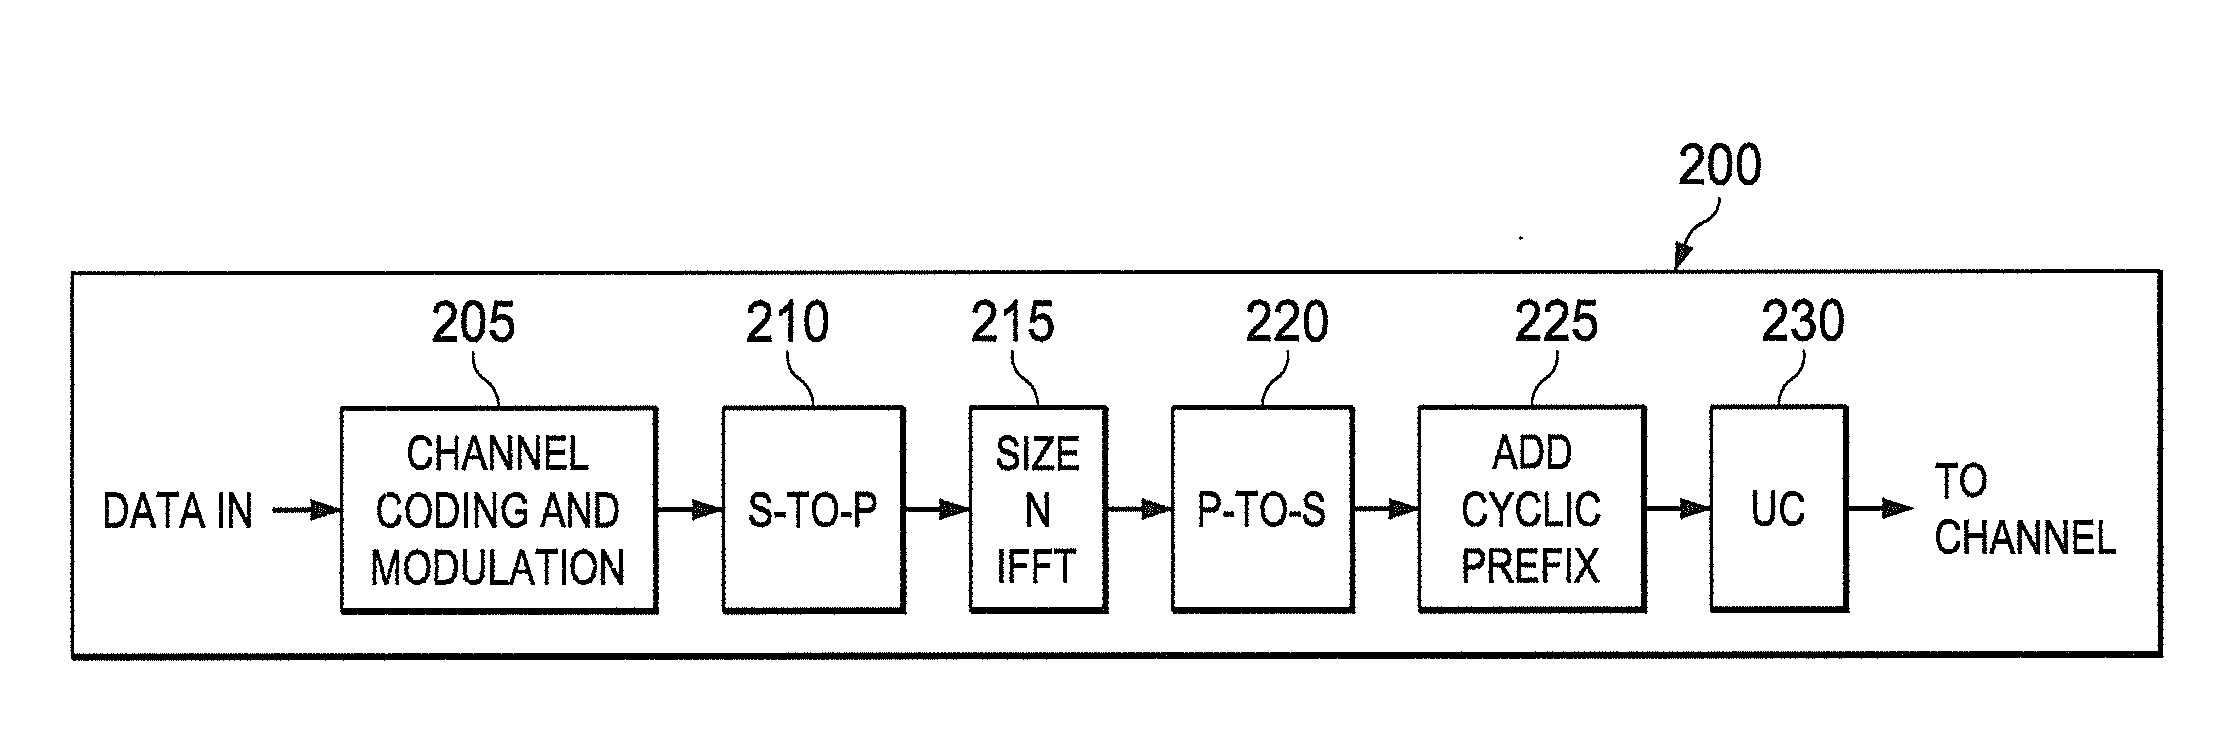 LDPC code family for millimeter-wave band communications in a wireless network